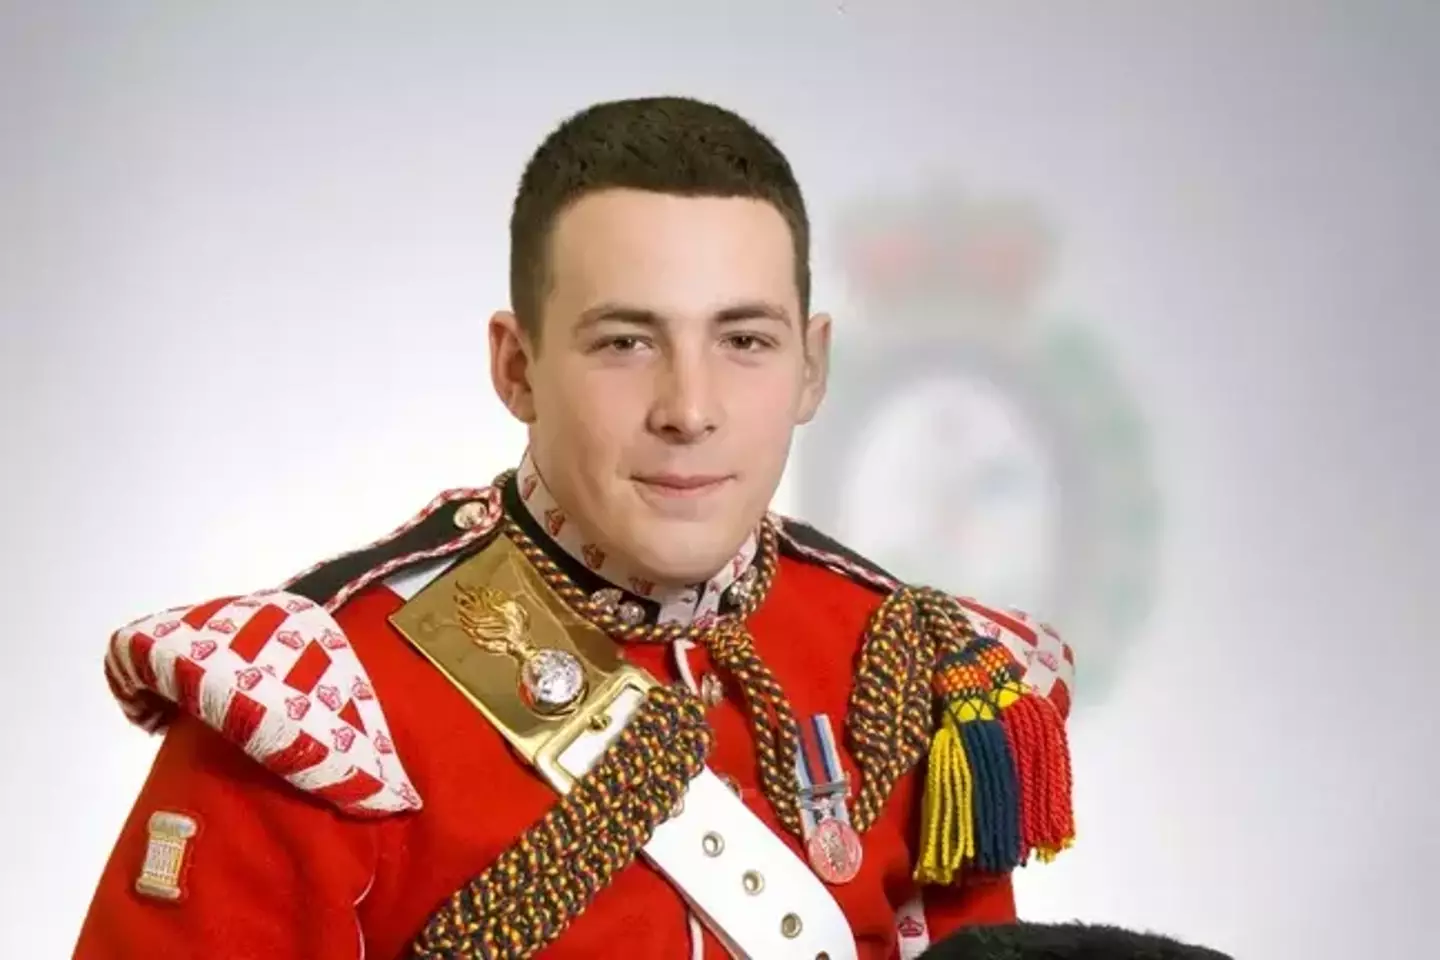 Lee Rigby was murdered 10 years ago by Michael Adebolajo and Michael Adebowale.